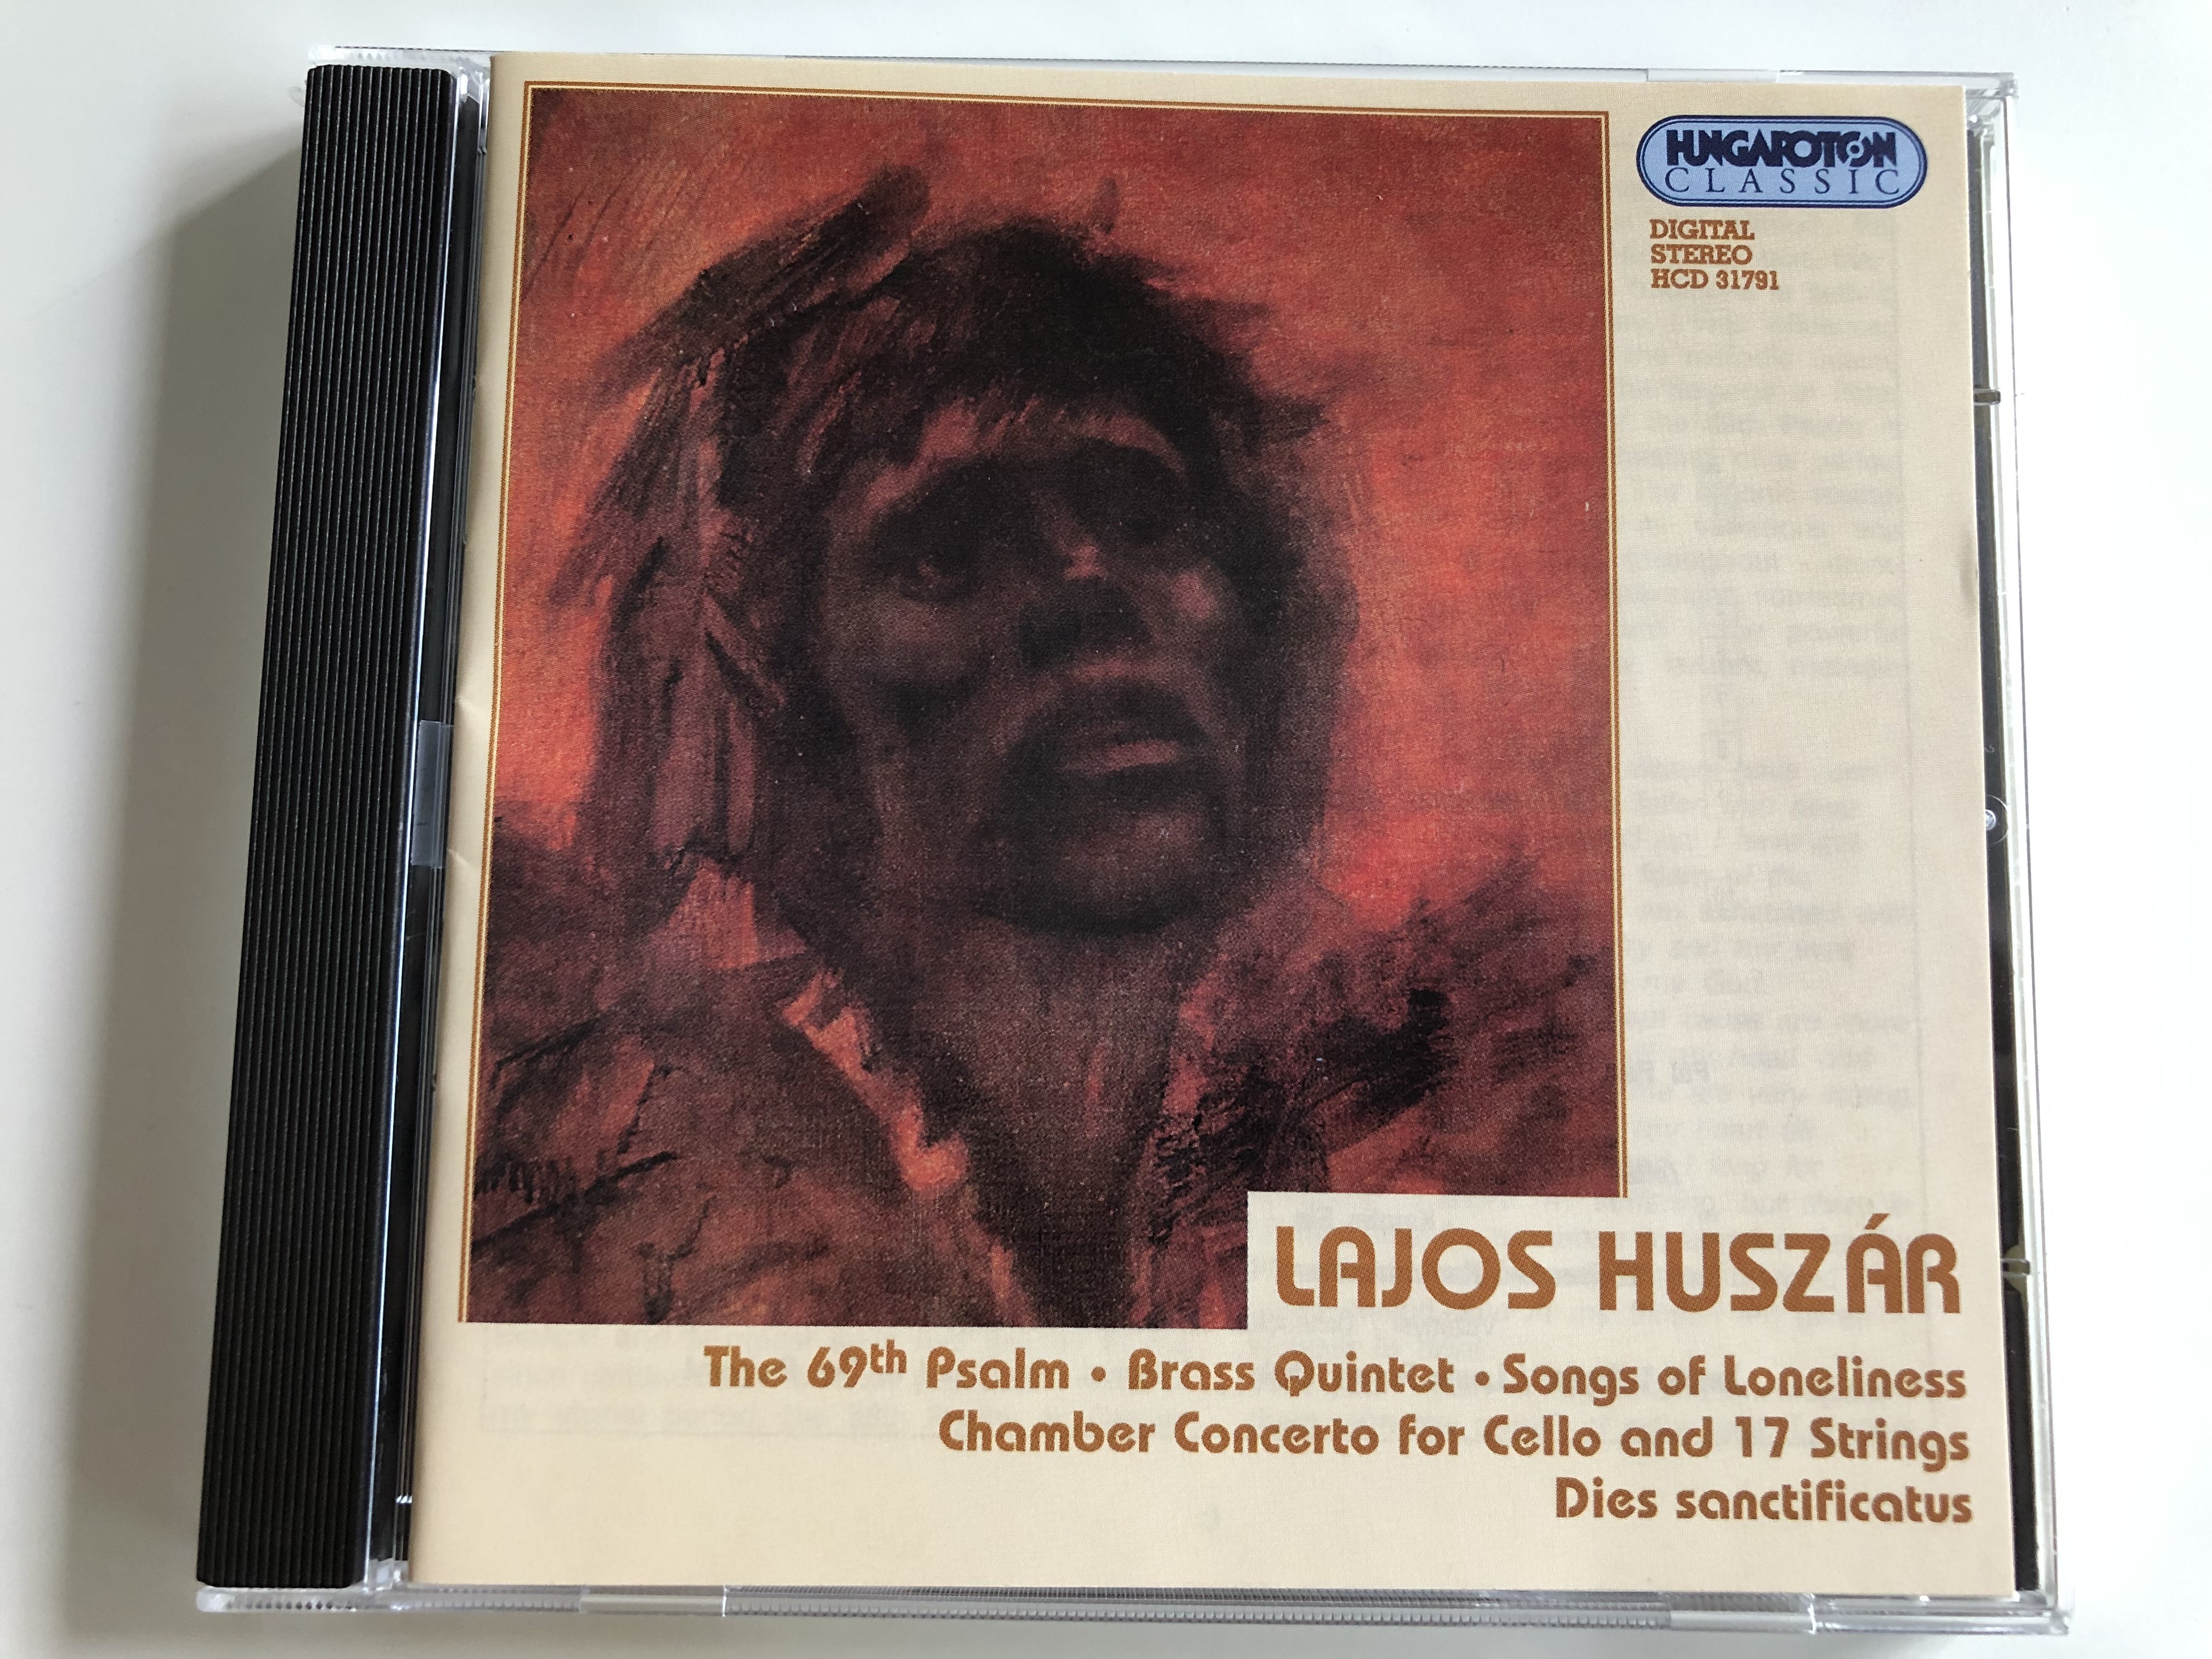 lajos-husz-r-the-69th-psalm-brass-quintet-songs-of-loneliness-chamber-concerto-for-cello-and-17-strings-dies-sanctificatus-hungaroton-classic-audio-cd-1998-hcd-31791-1-.jpg